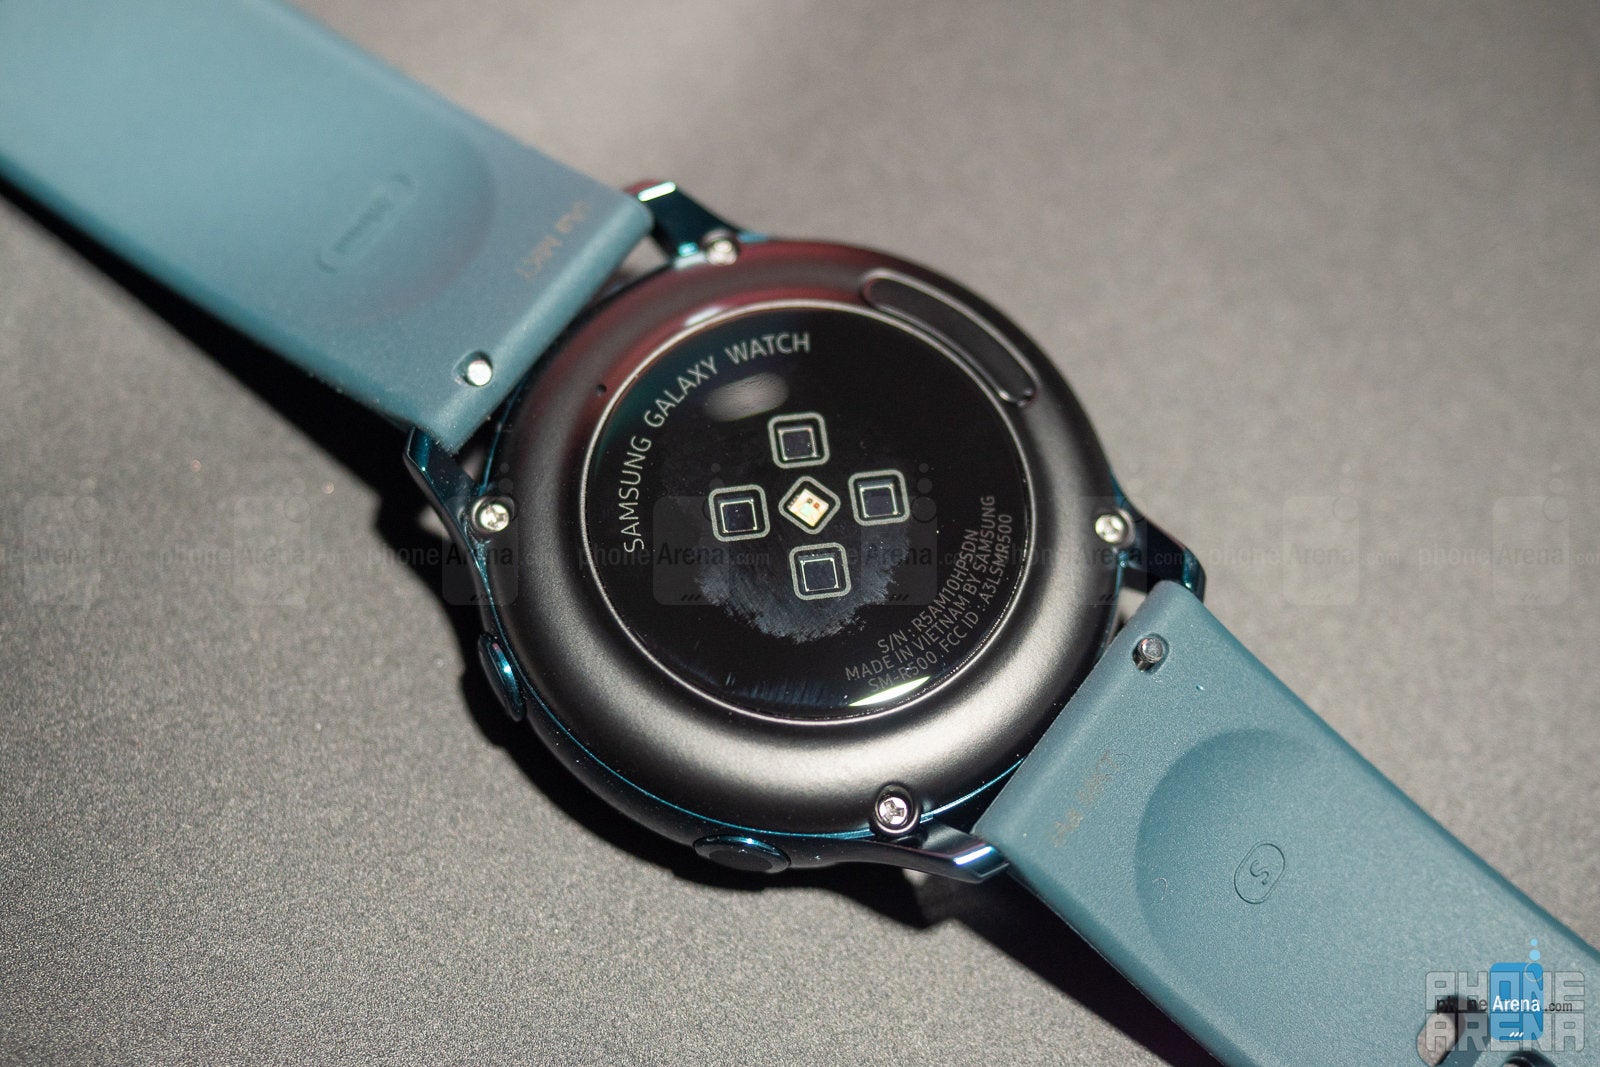 Samsung Galaxy Watch Active hands-on: compact, stylish, functional, and affordable